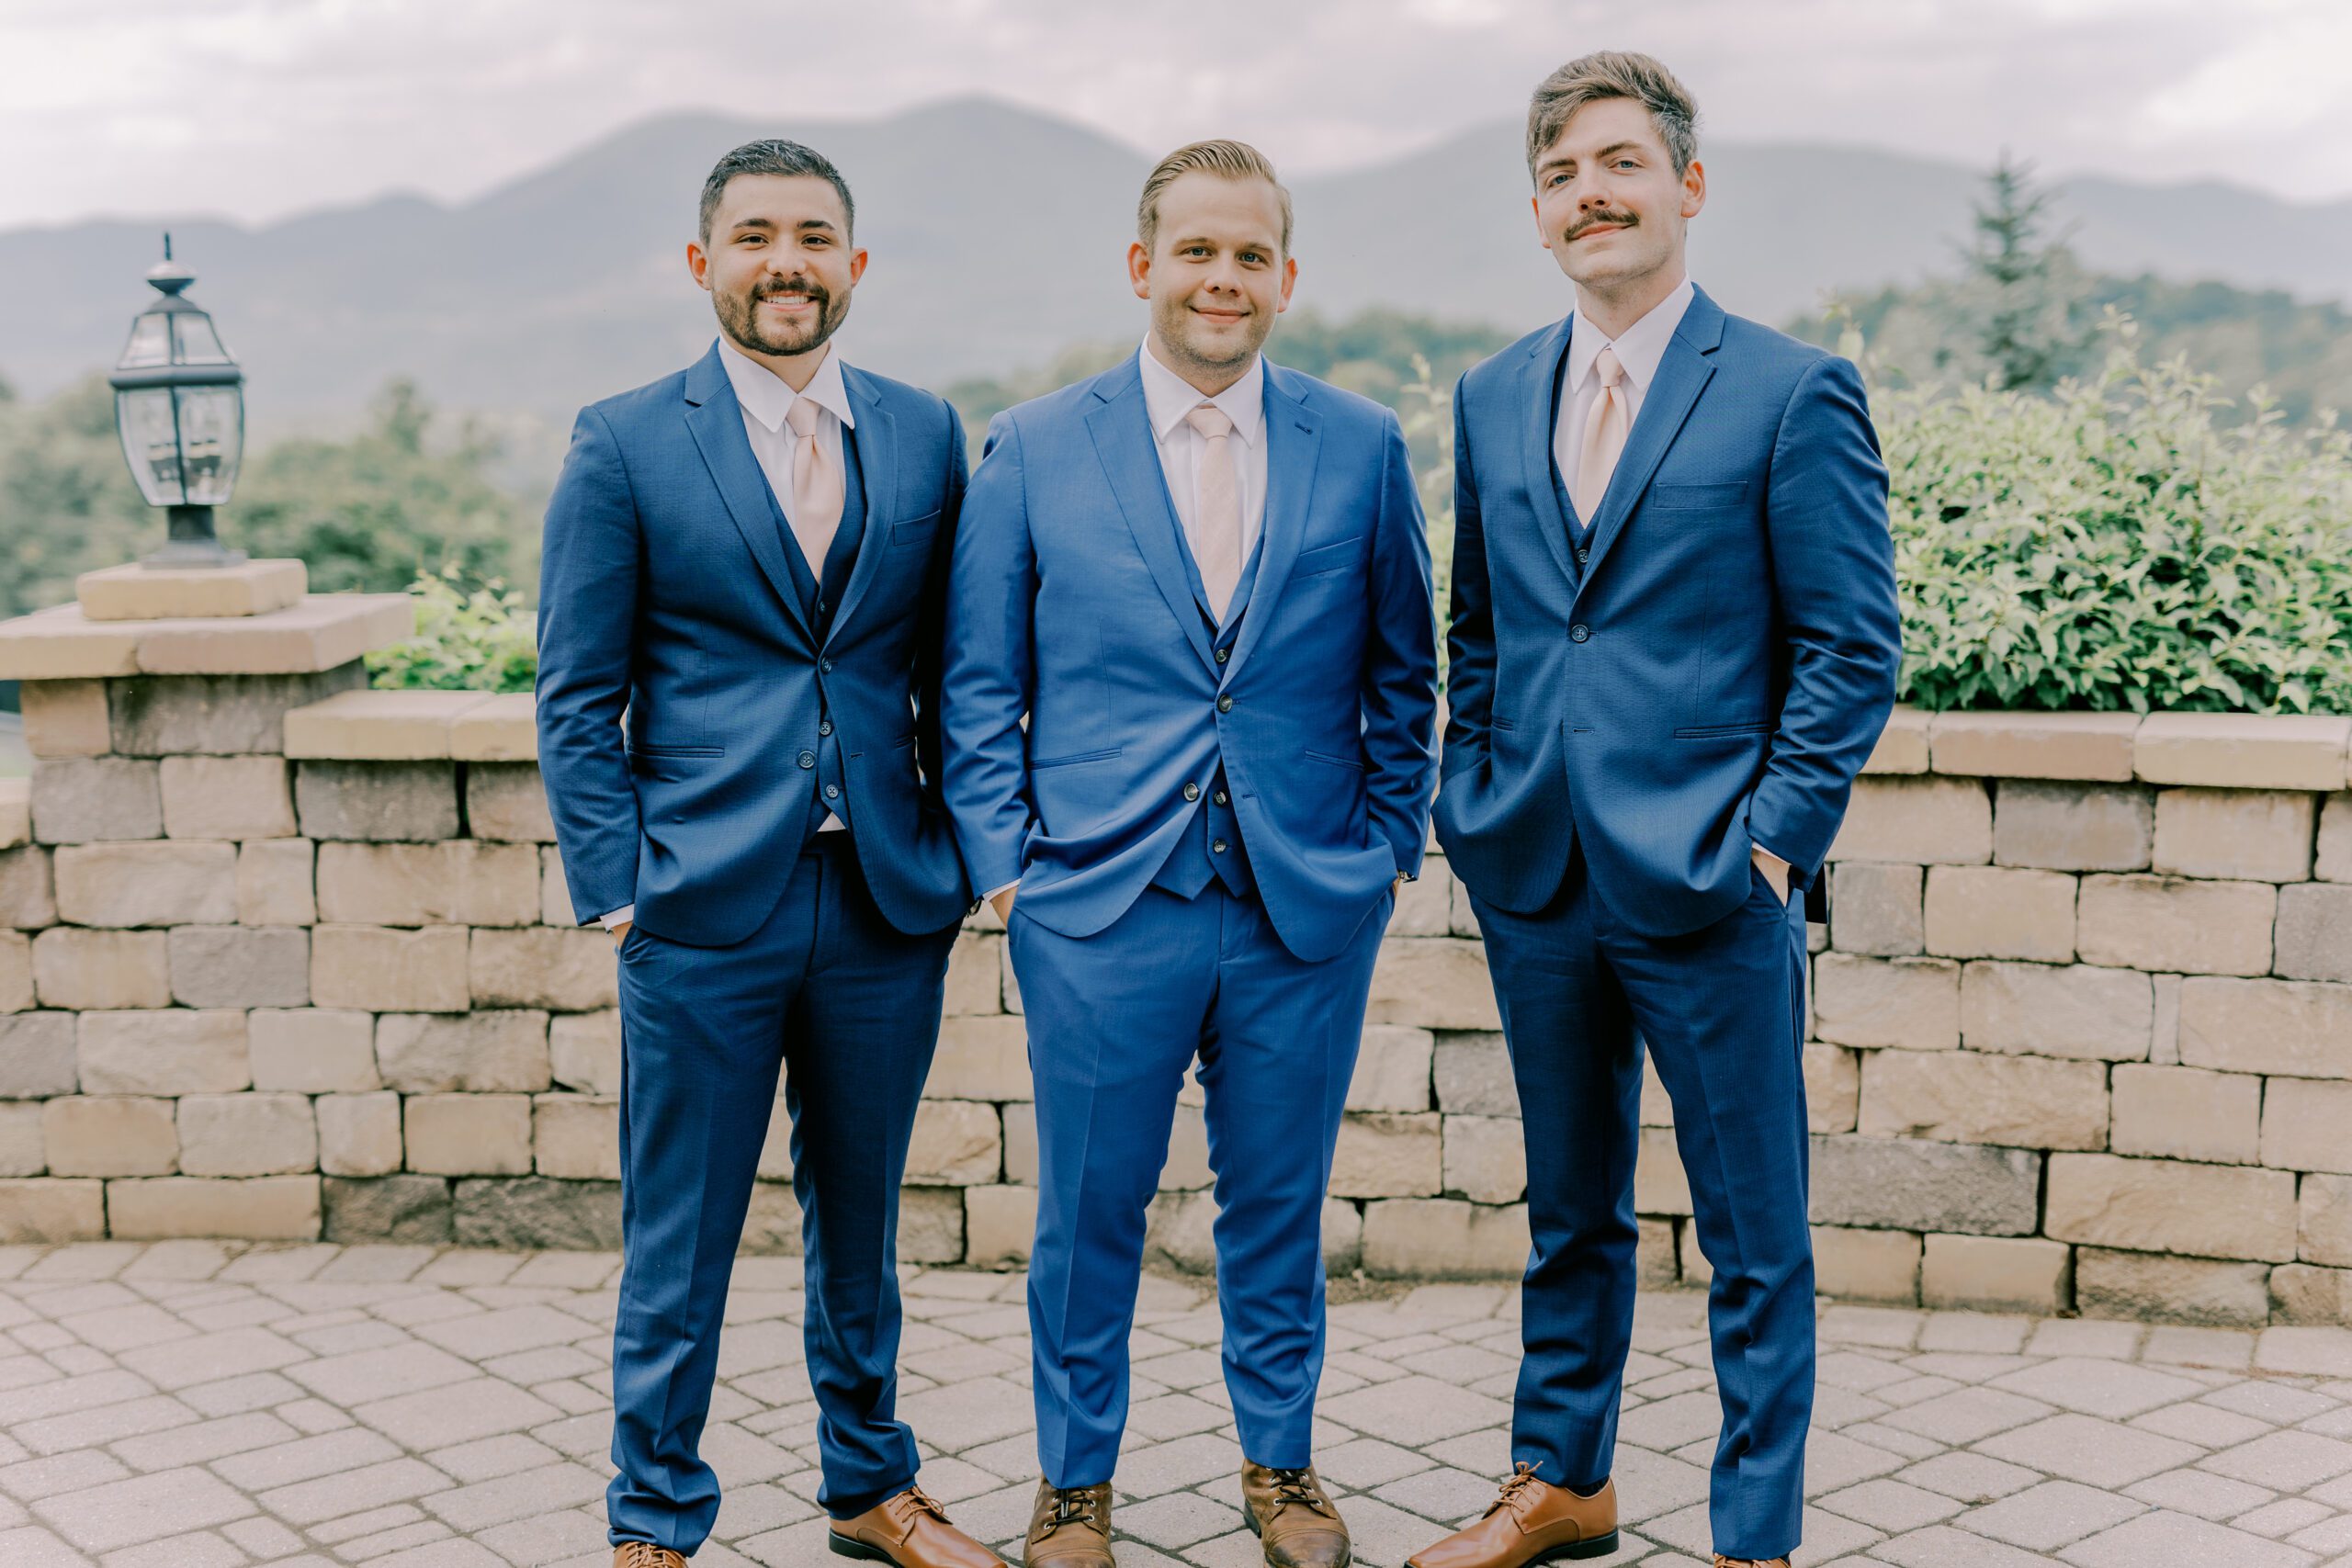 Groom and two groomsmen stand in matching blue suits smiling at camera.